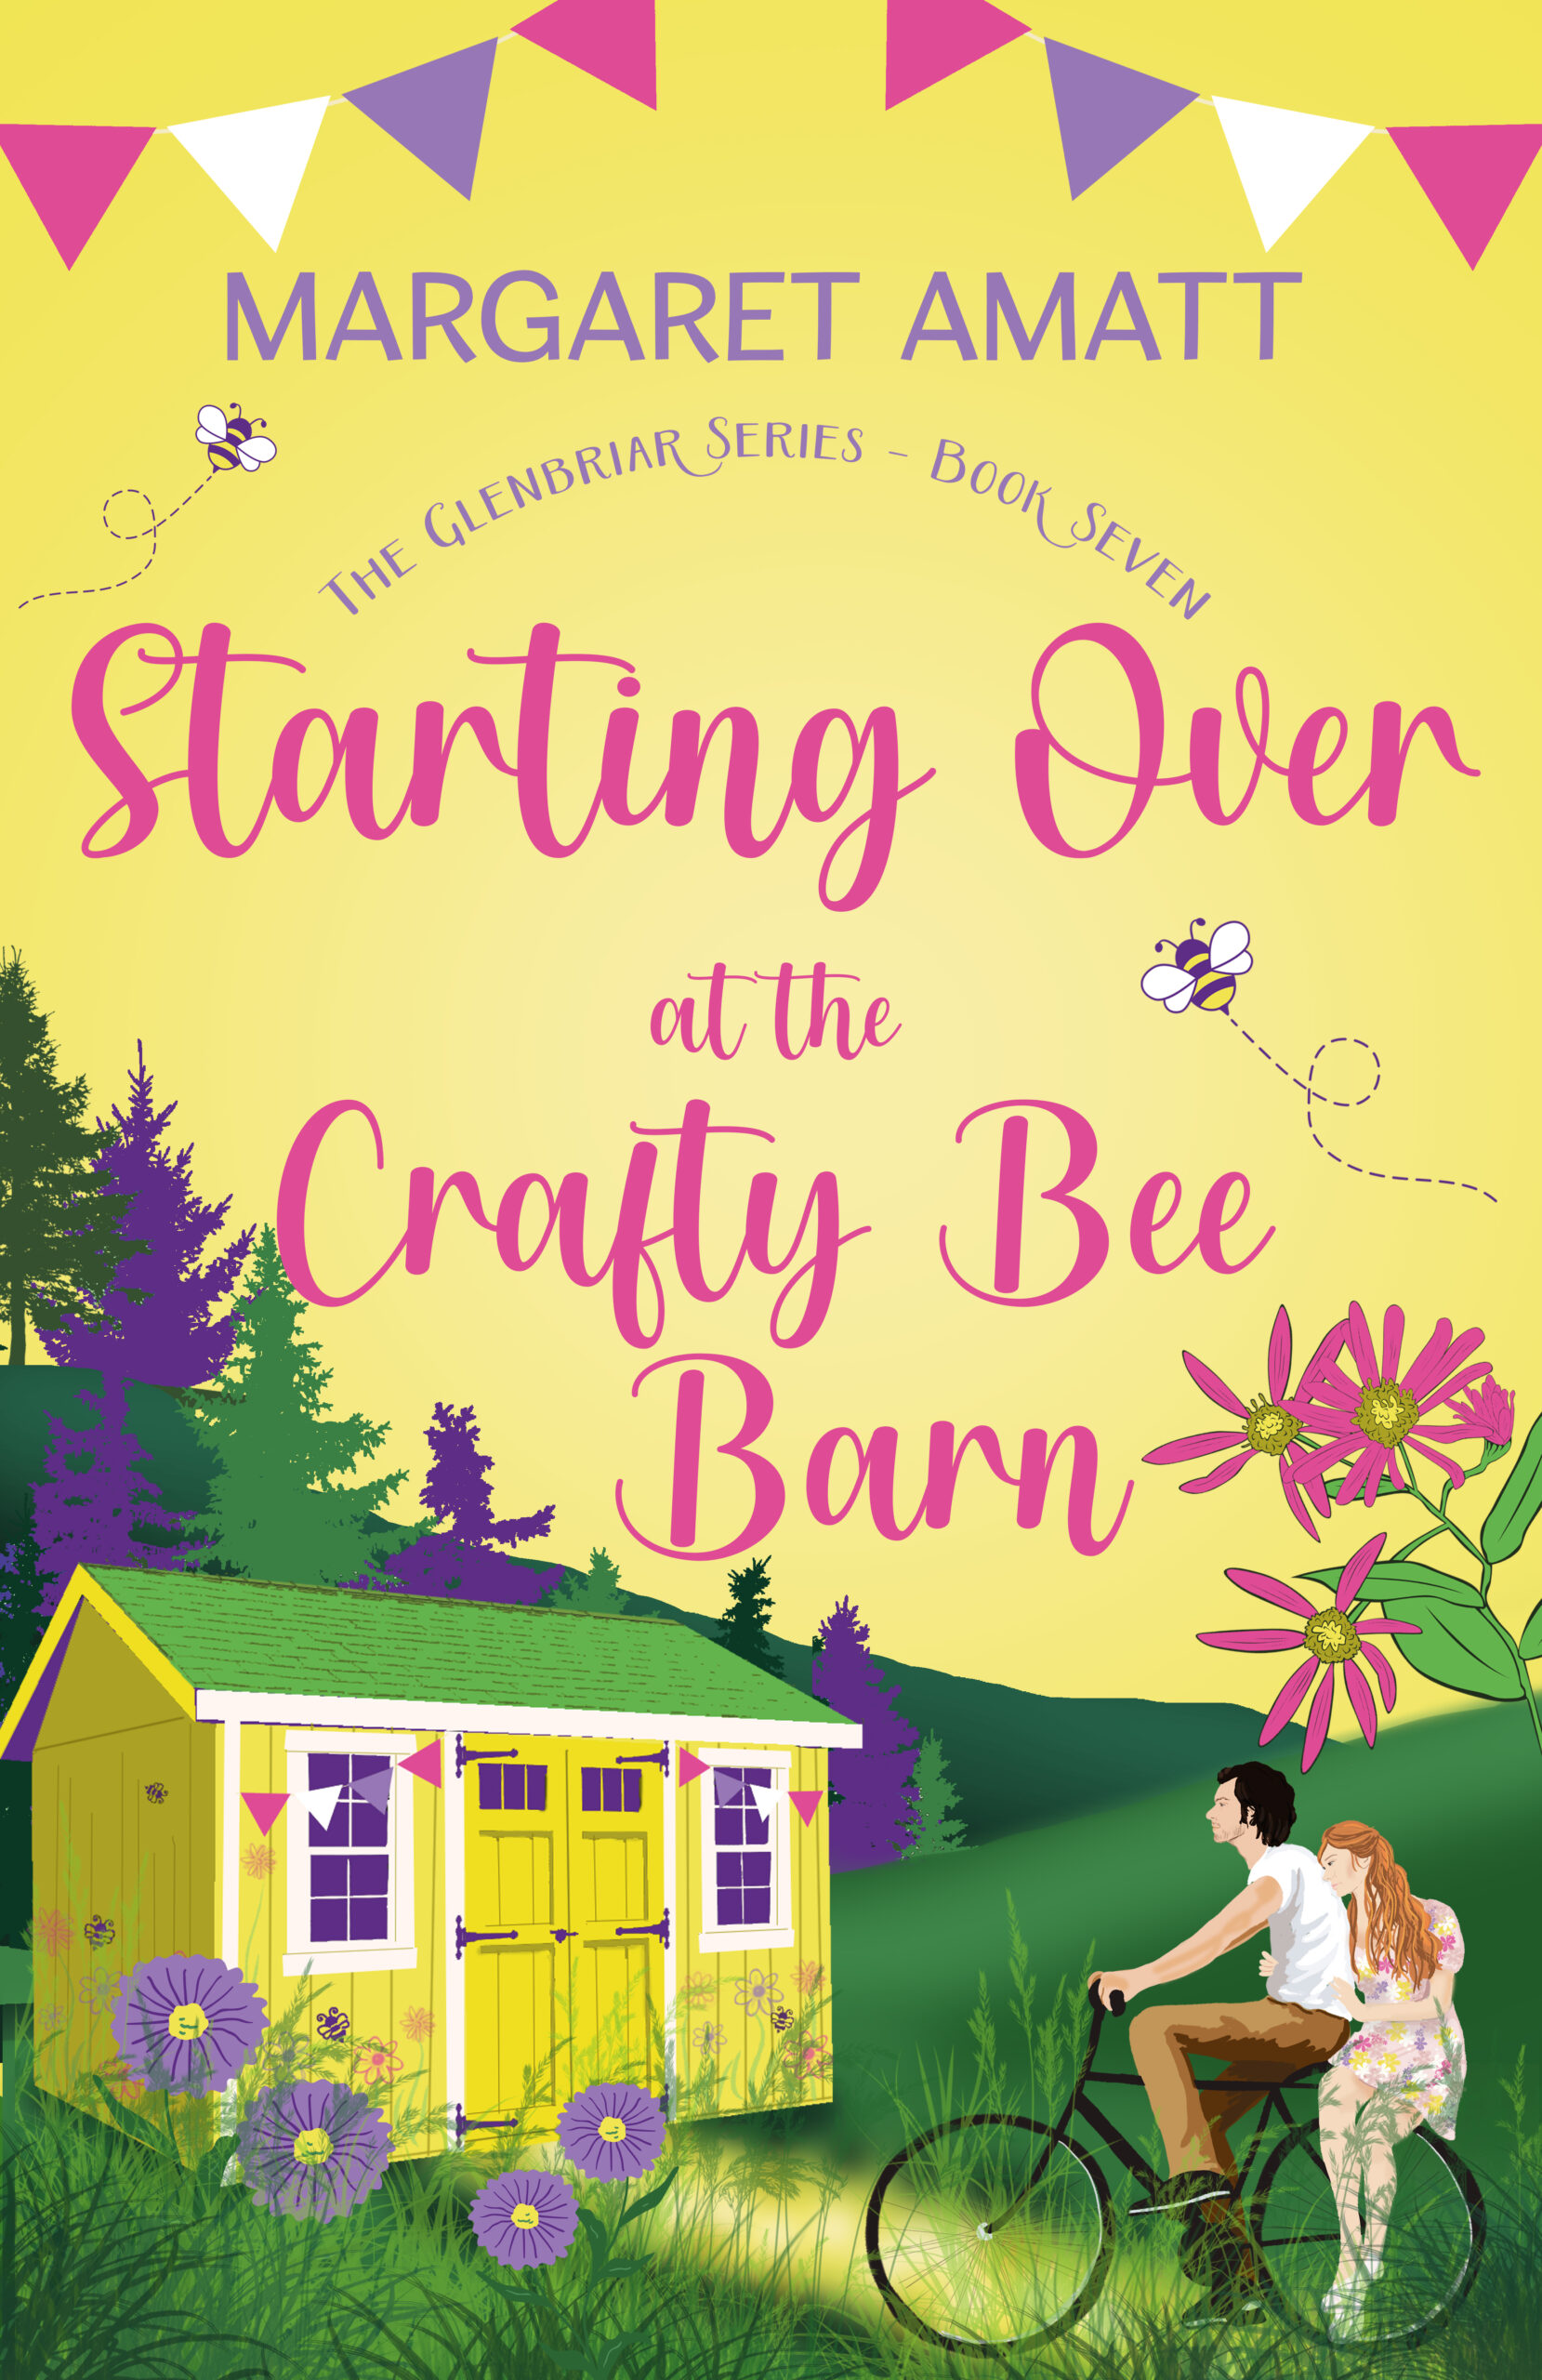 Starting Over at the Crafty Bee Barn  by Margaret Amatt